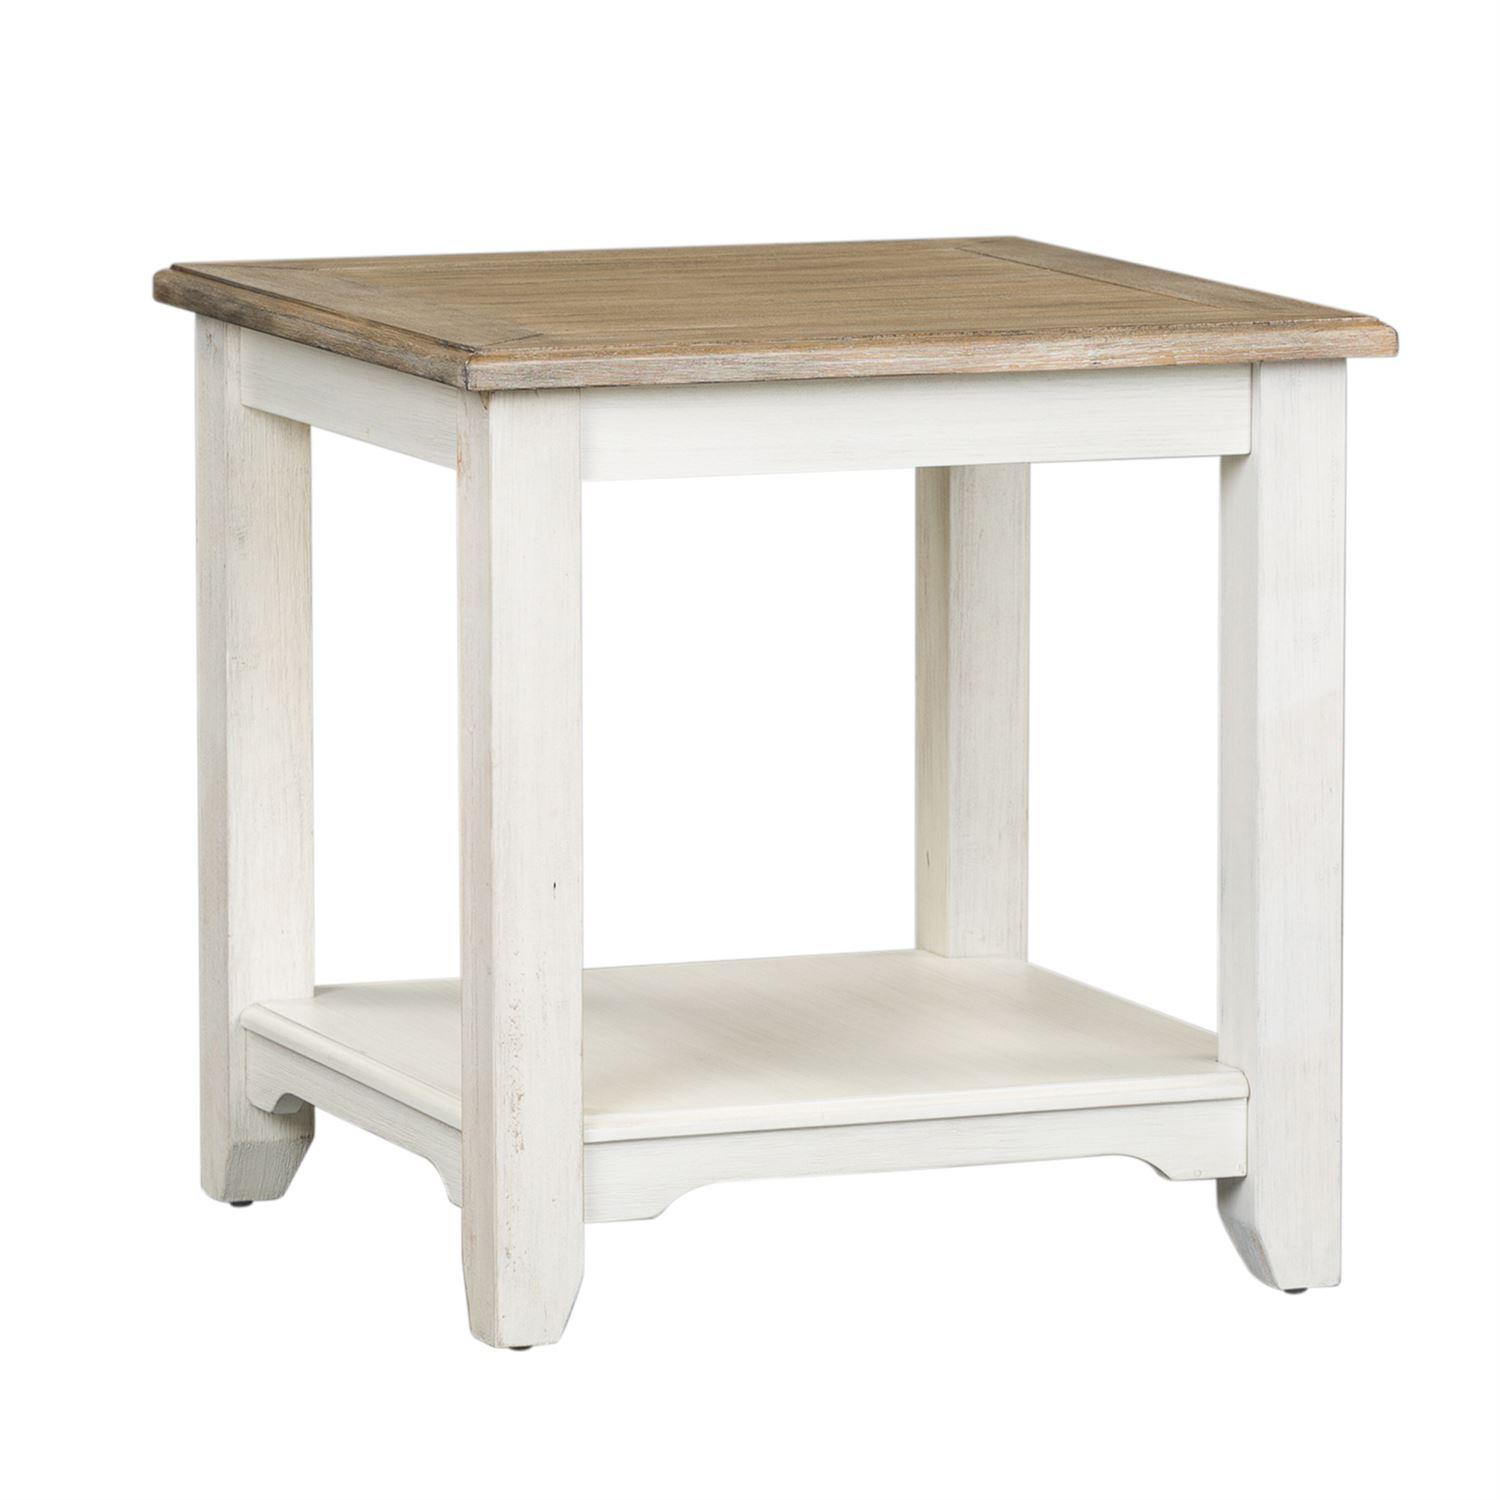 Transitional End Table Summerville  (171-OT) End Table 171-OT1020 in Cream, White 